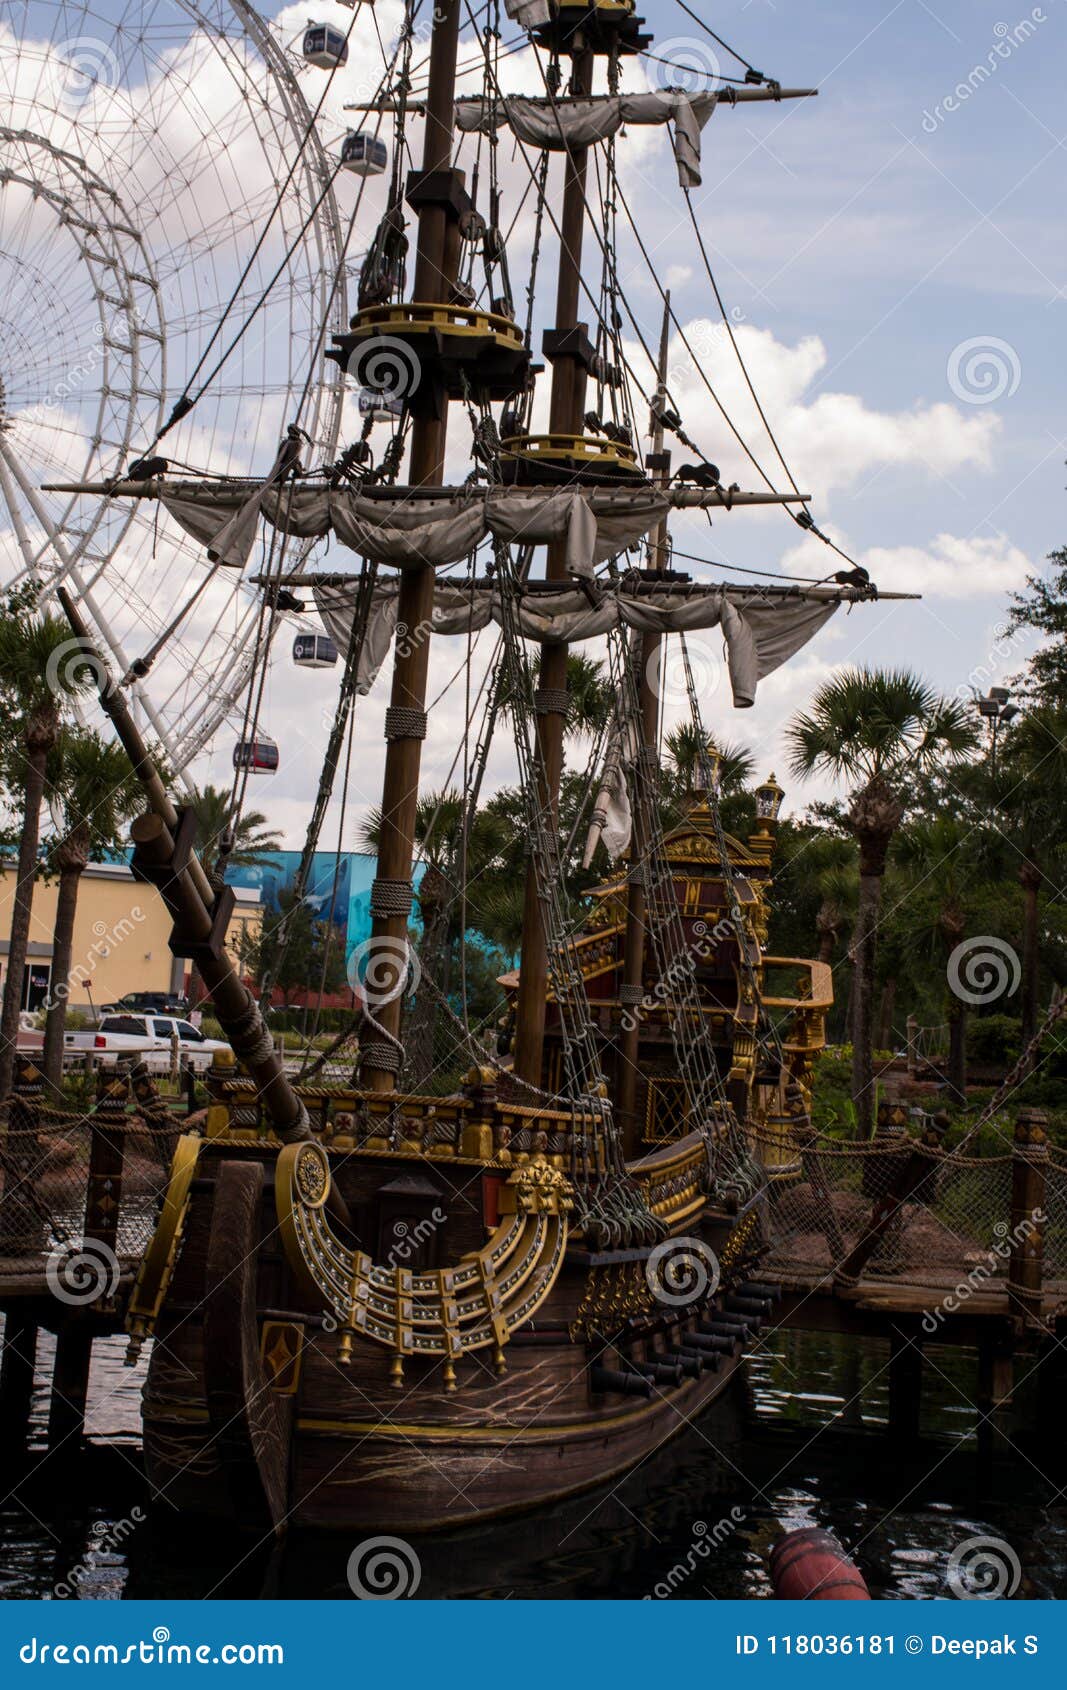 Pirate Ship in Orlando, Florida Editorial Photo - Image of attractions,  middle: 118036181